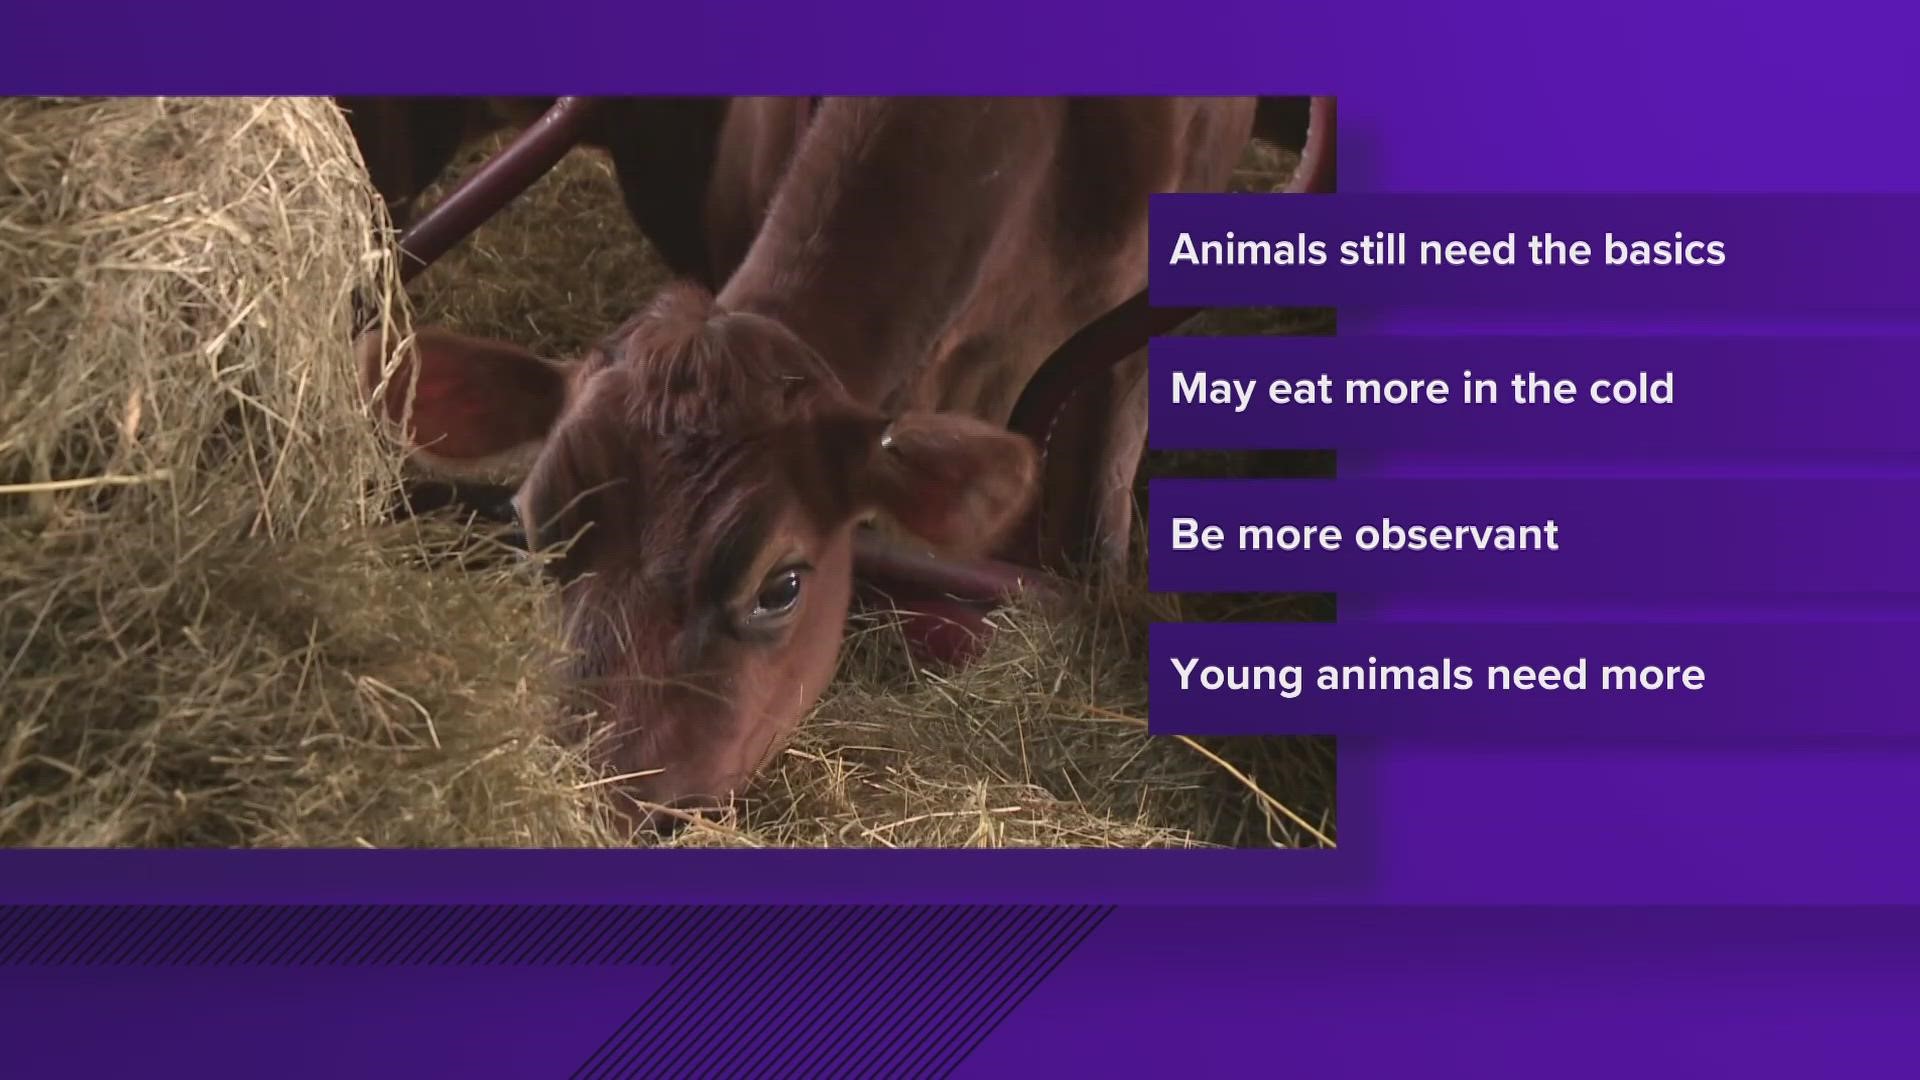 The University of Maine is offering some strategies to keep farm animals warm in frigid weather.